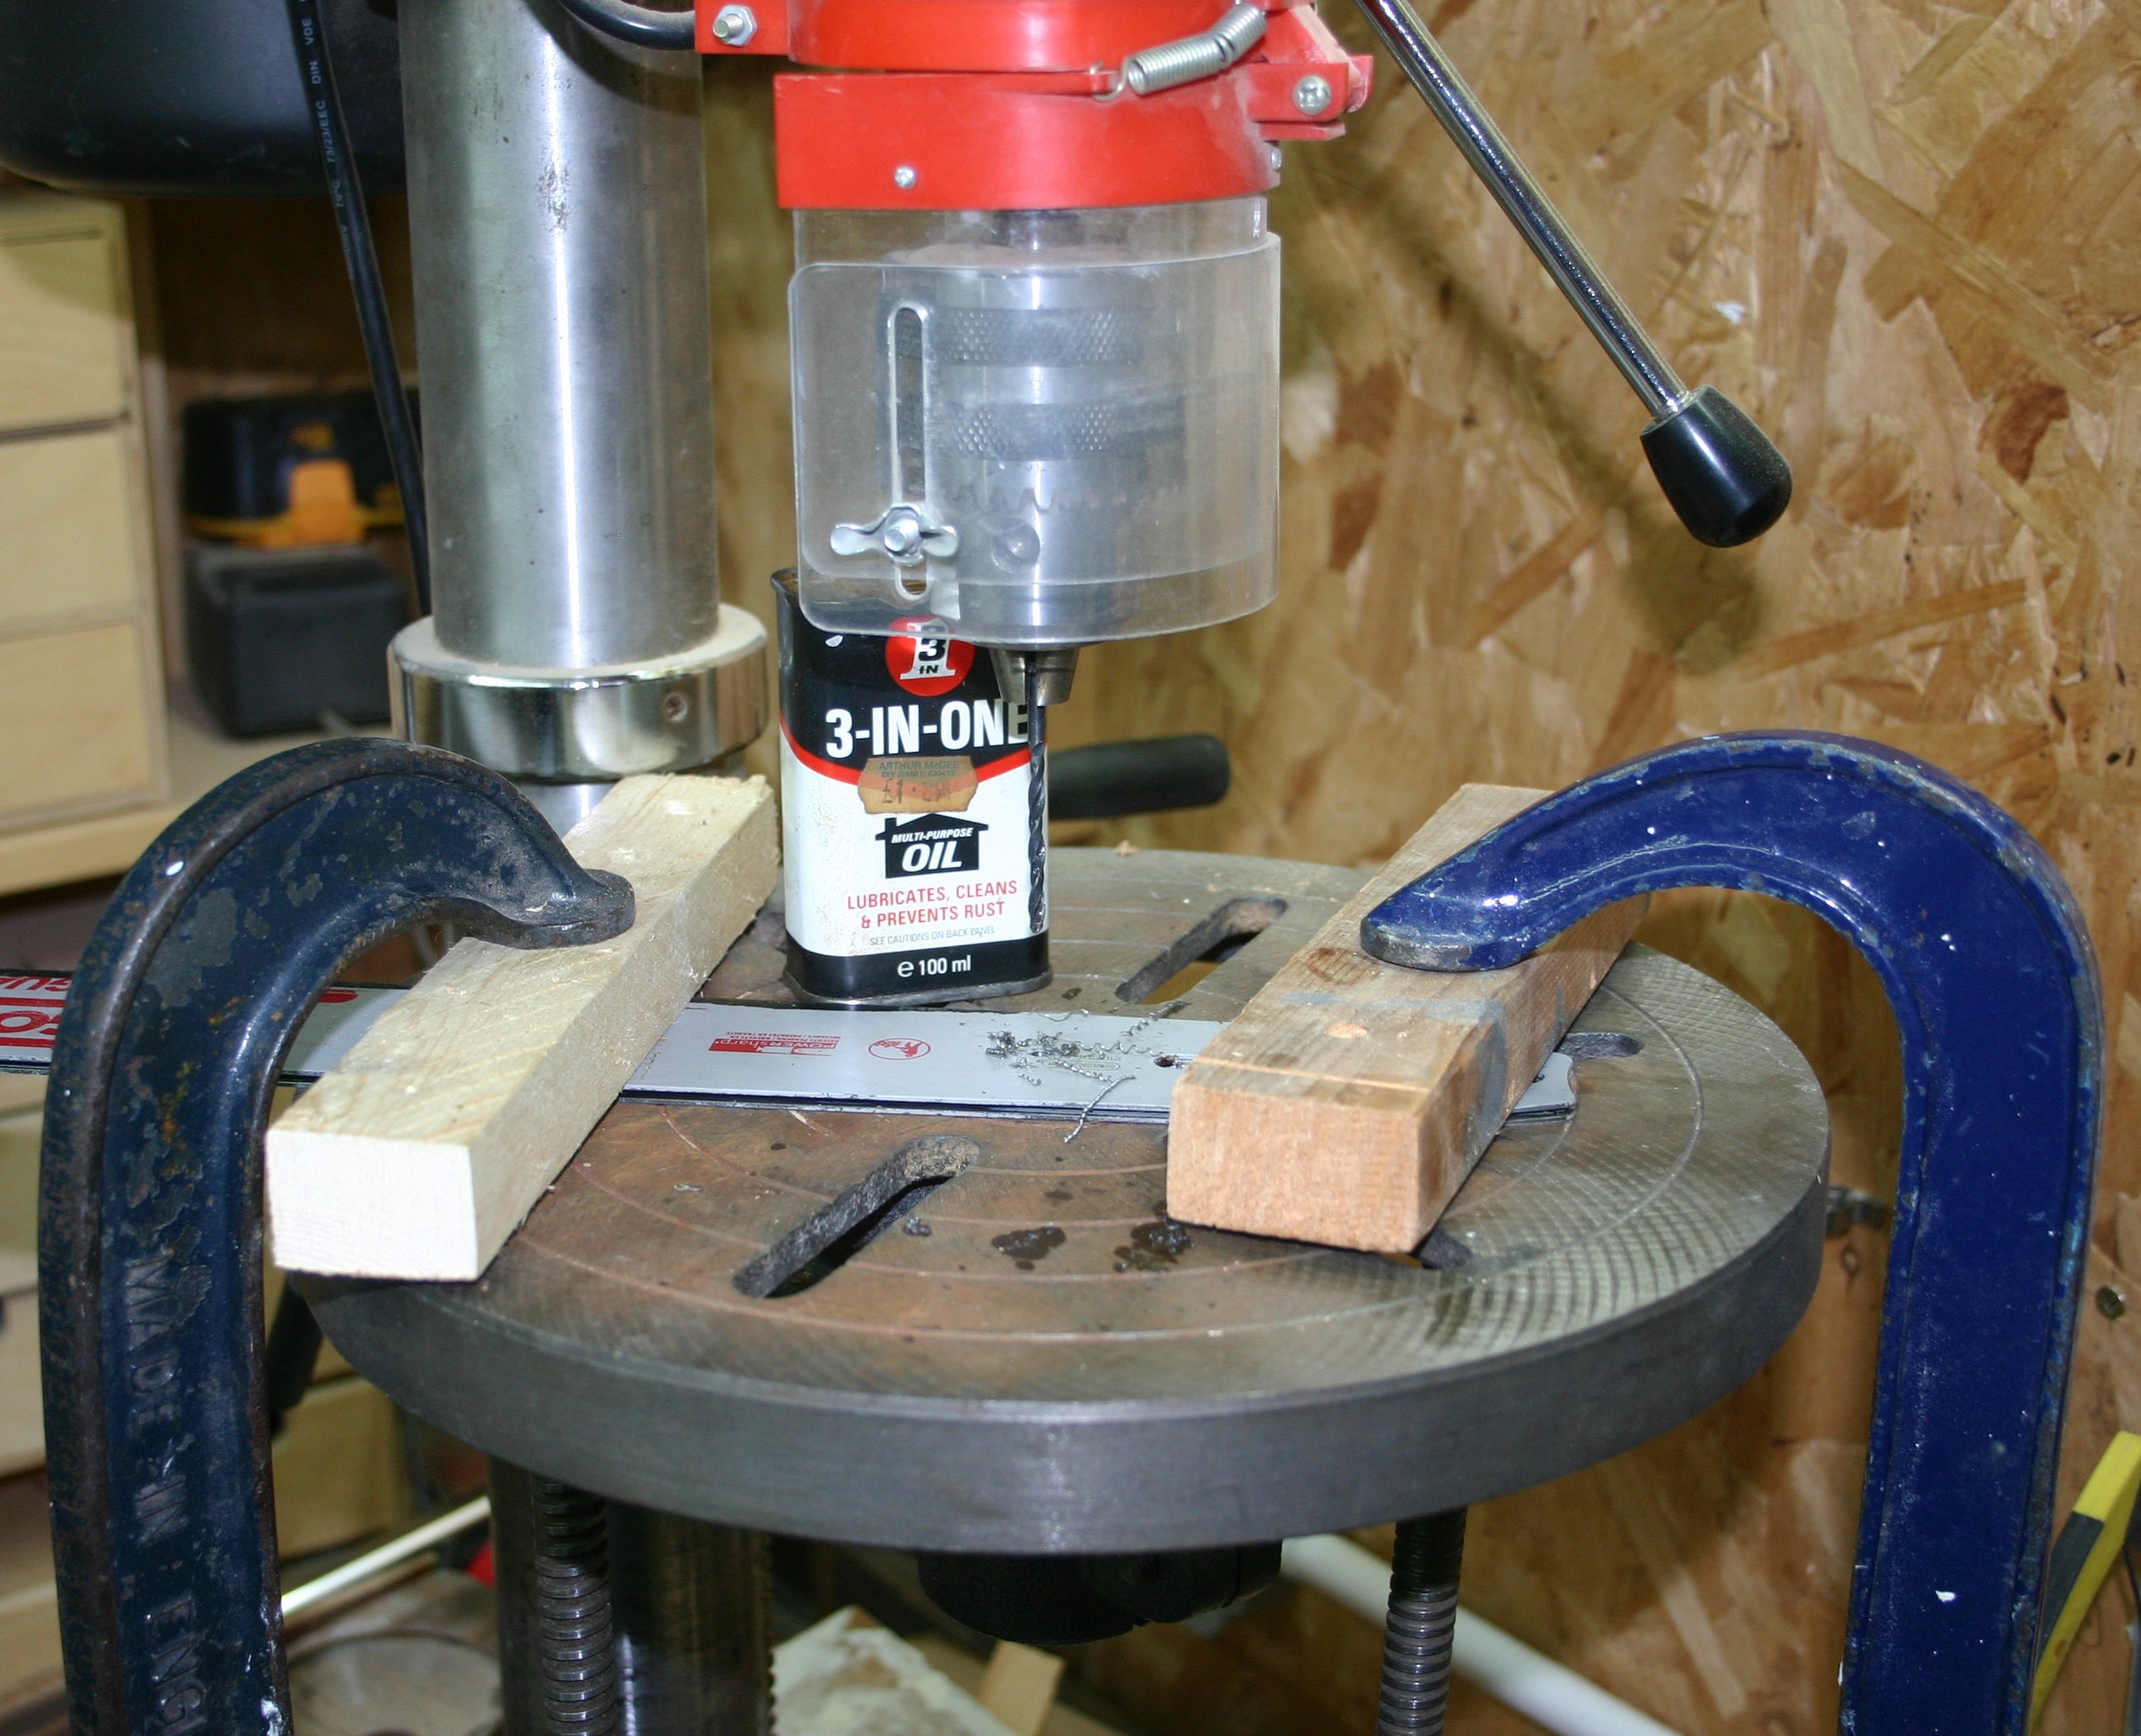 Drilling a rear bolting hole in the chainsaw guide bar.